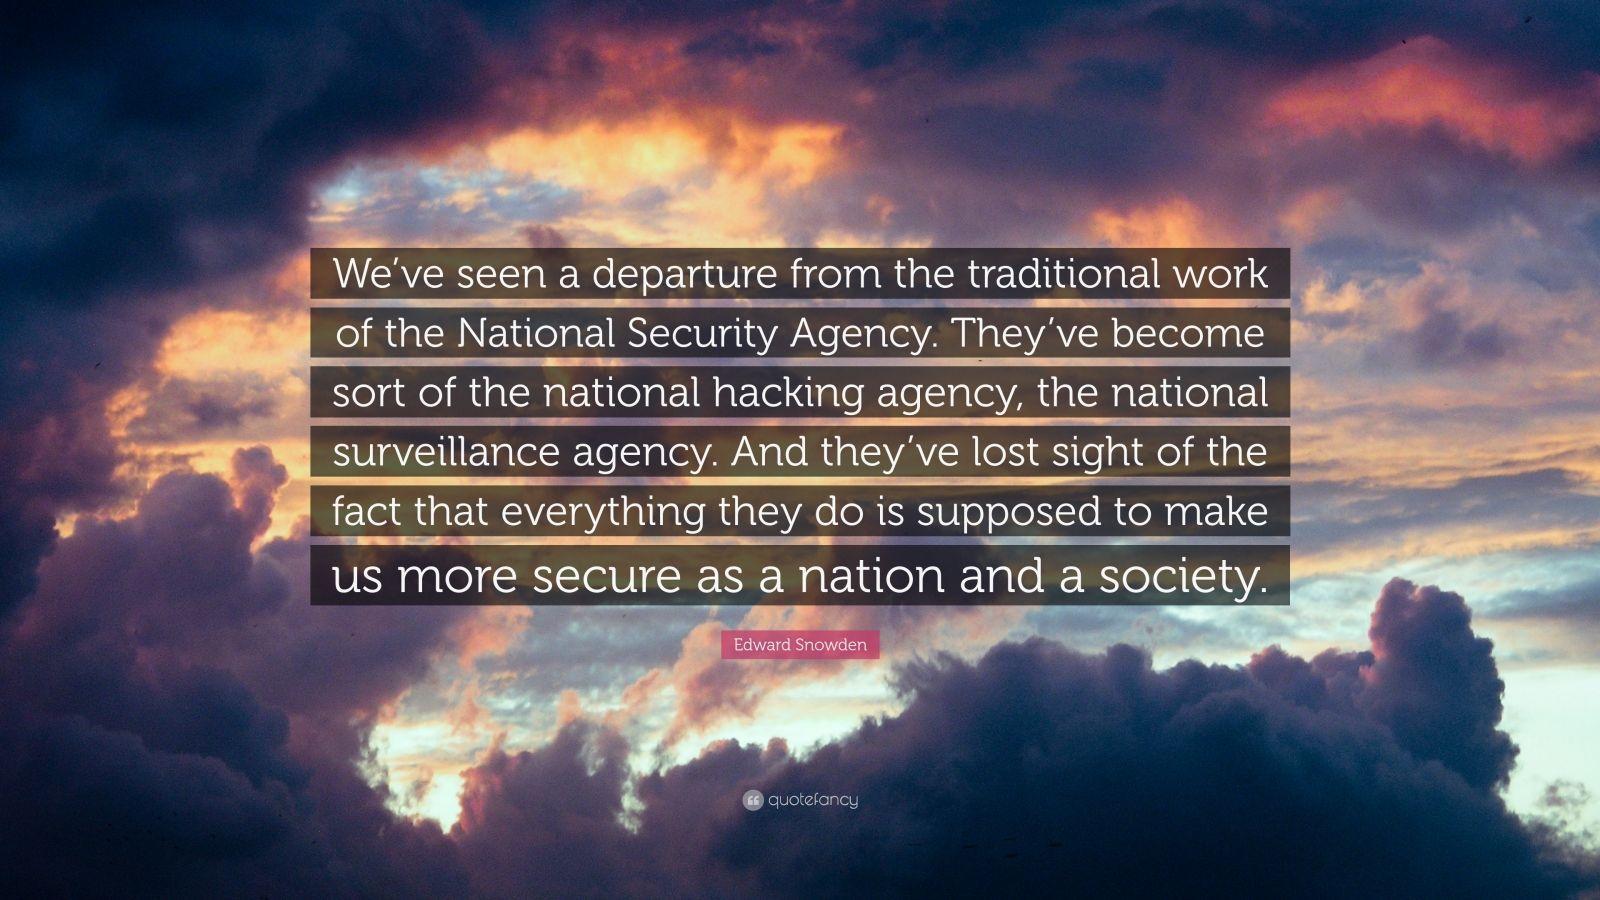 Edward Snowden Quote: “We've seen a departure from the traditional